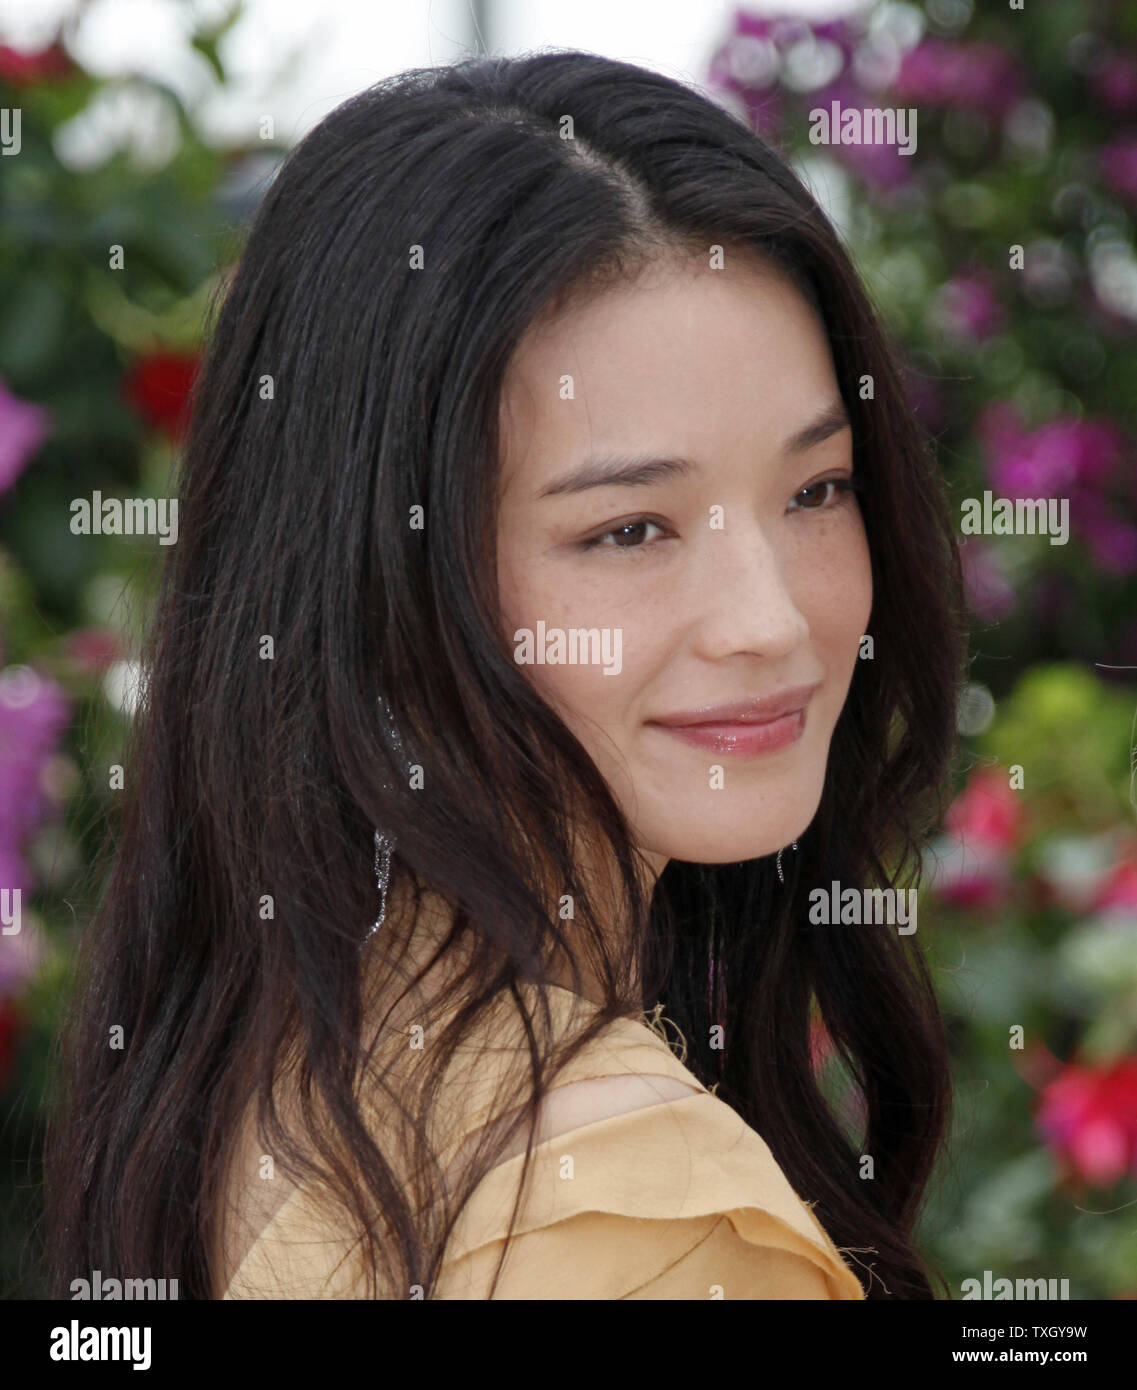 Actress and jury member Shu Qi arrives at a jury photocall before the official opening of the 62nd annual Cannes Film Festival in Cannes, France on May 13, 2009.   (UPI Photo/David Silpa) Stock Photo